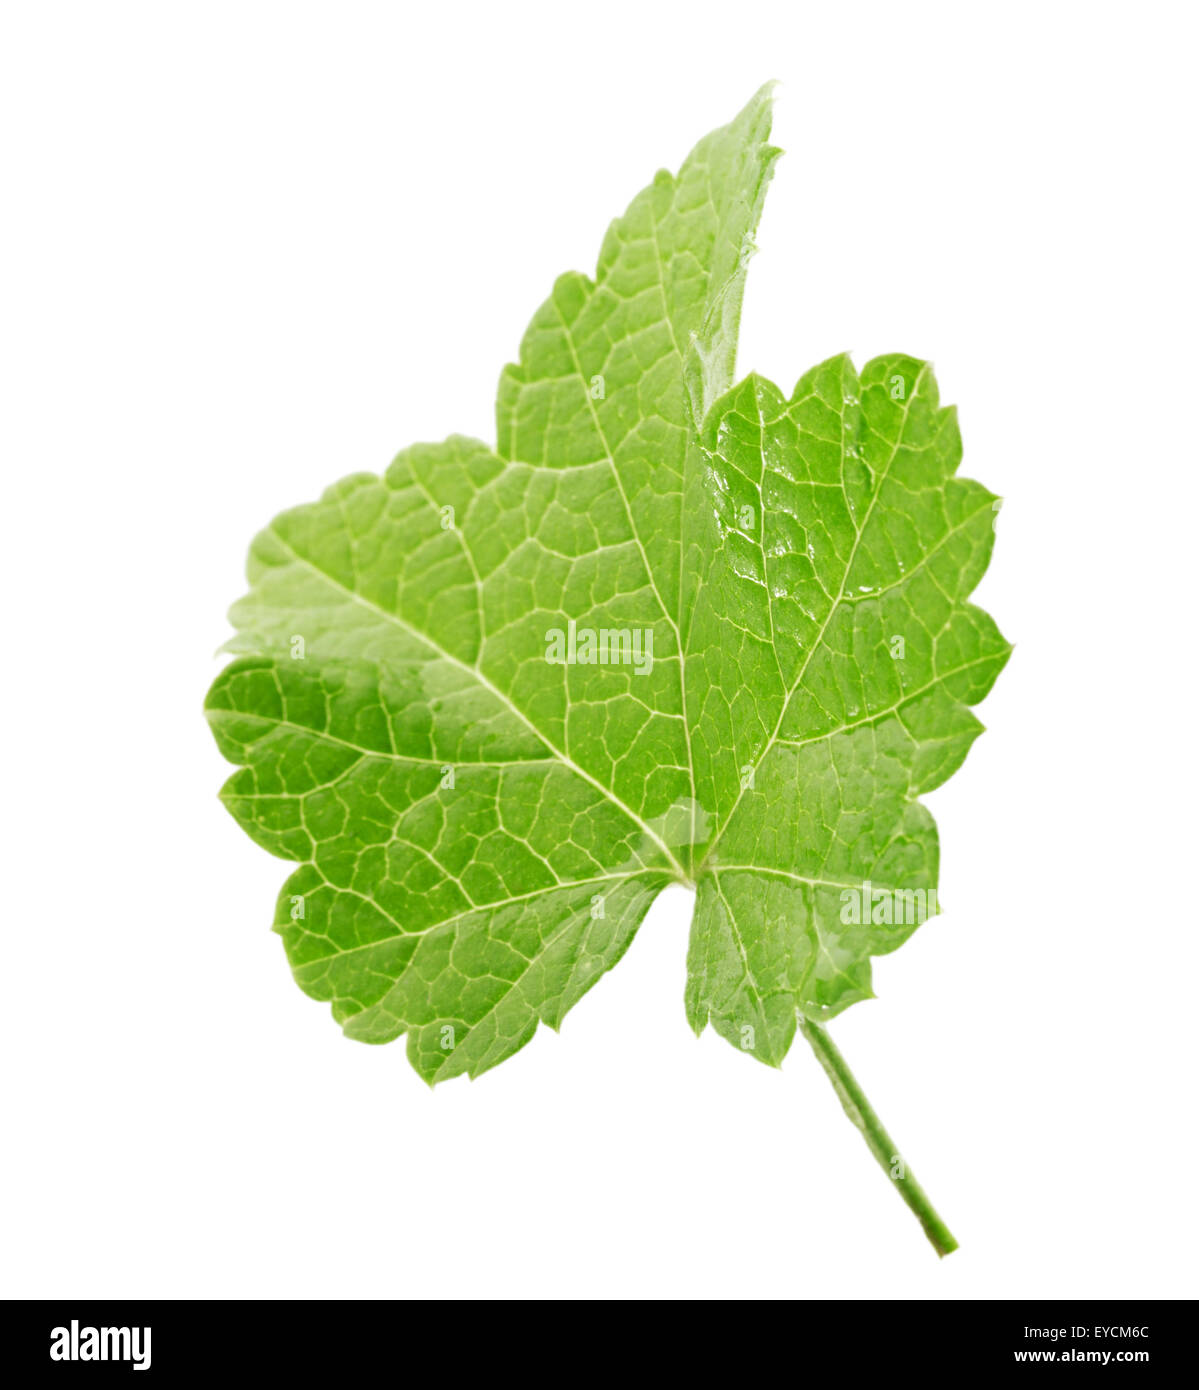 Currant leaf isolated on the white background. Stock Photo